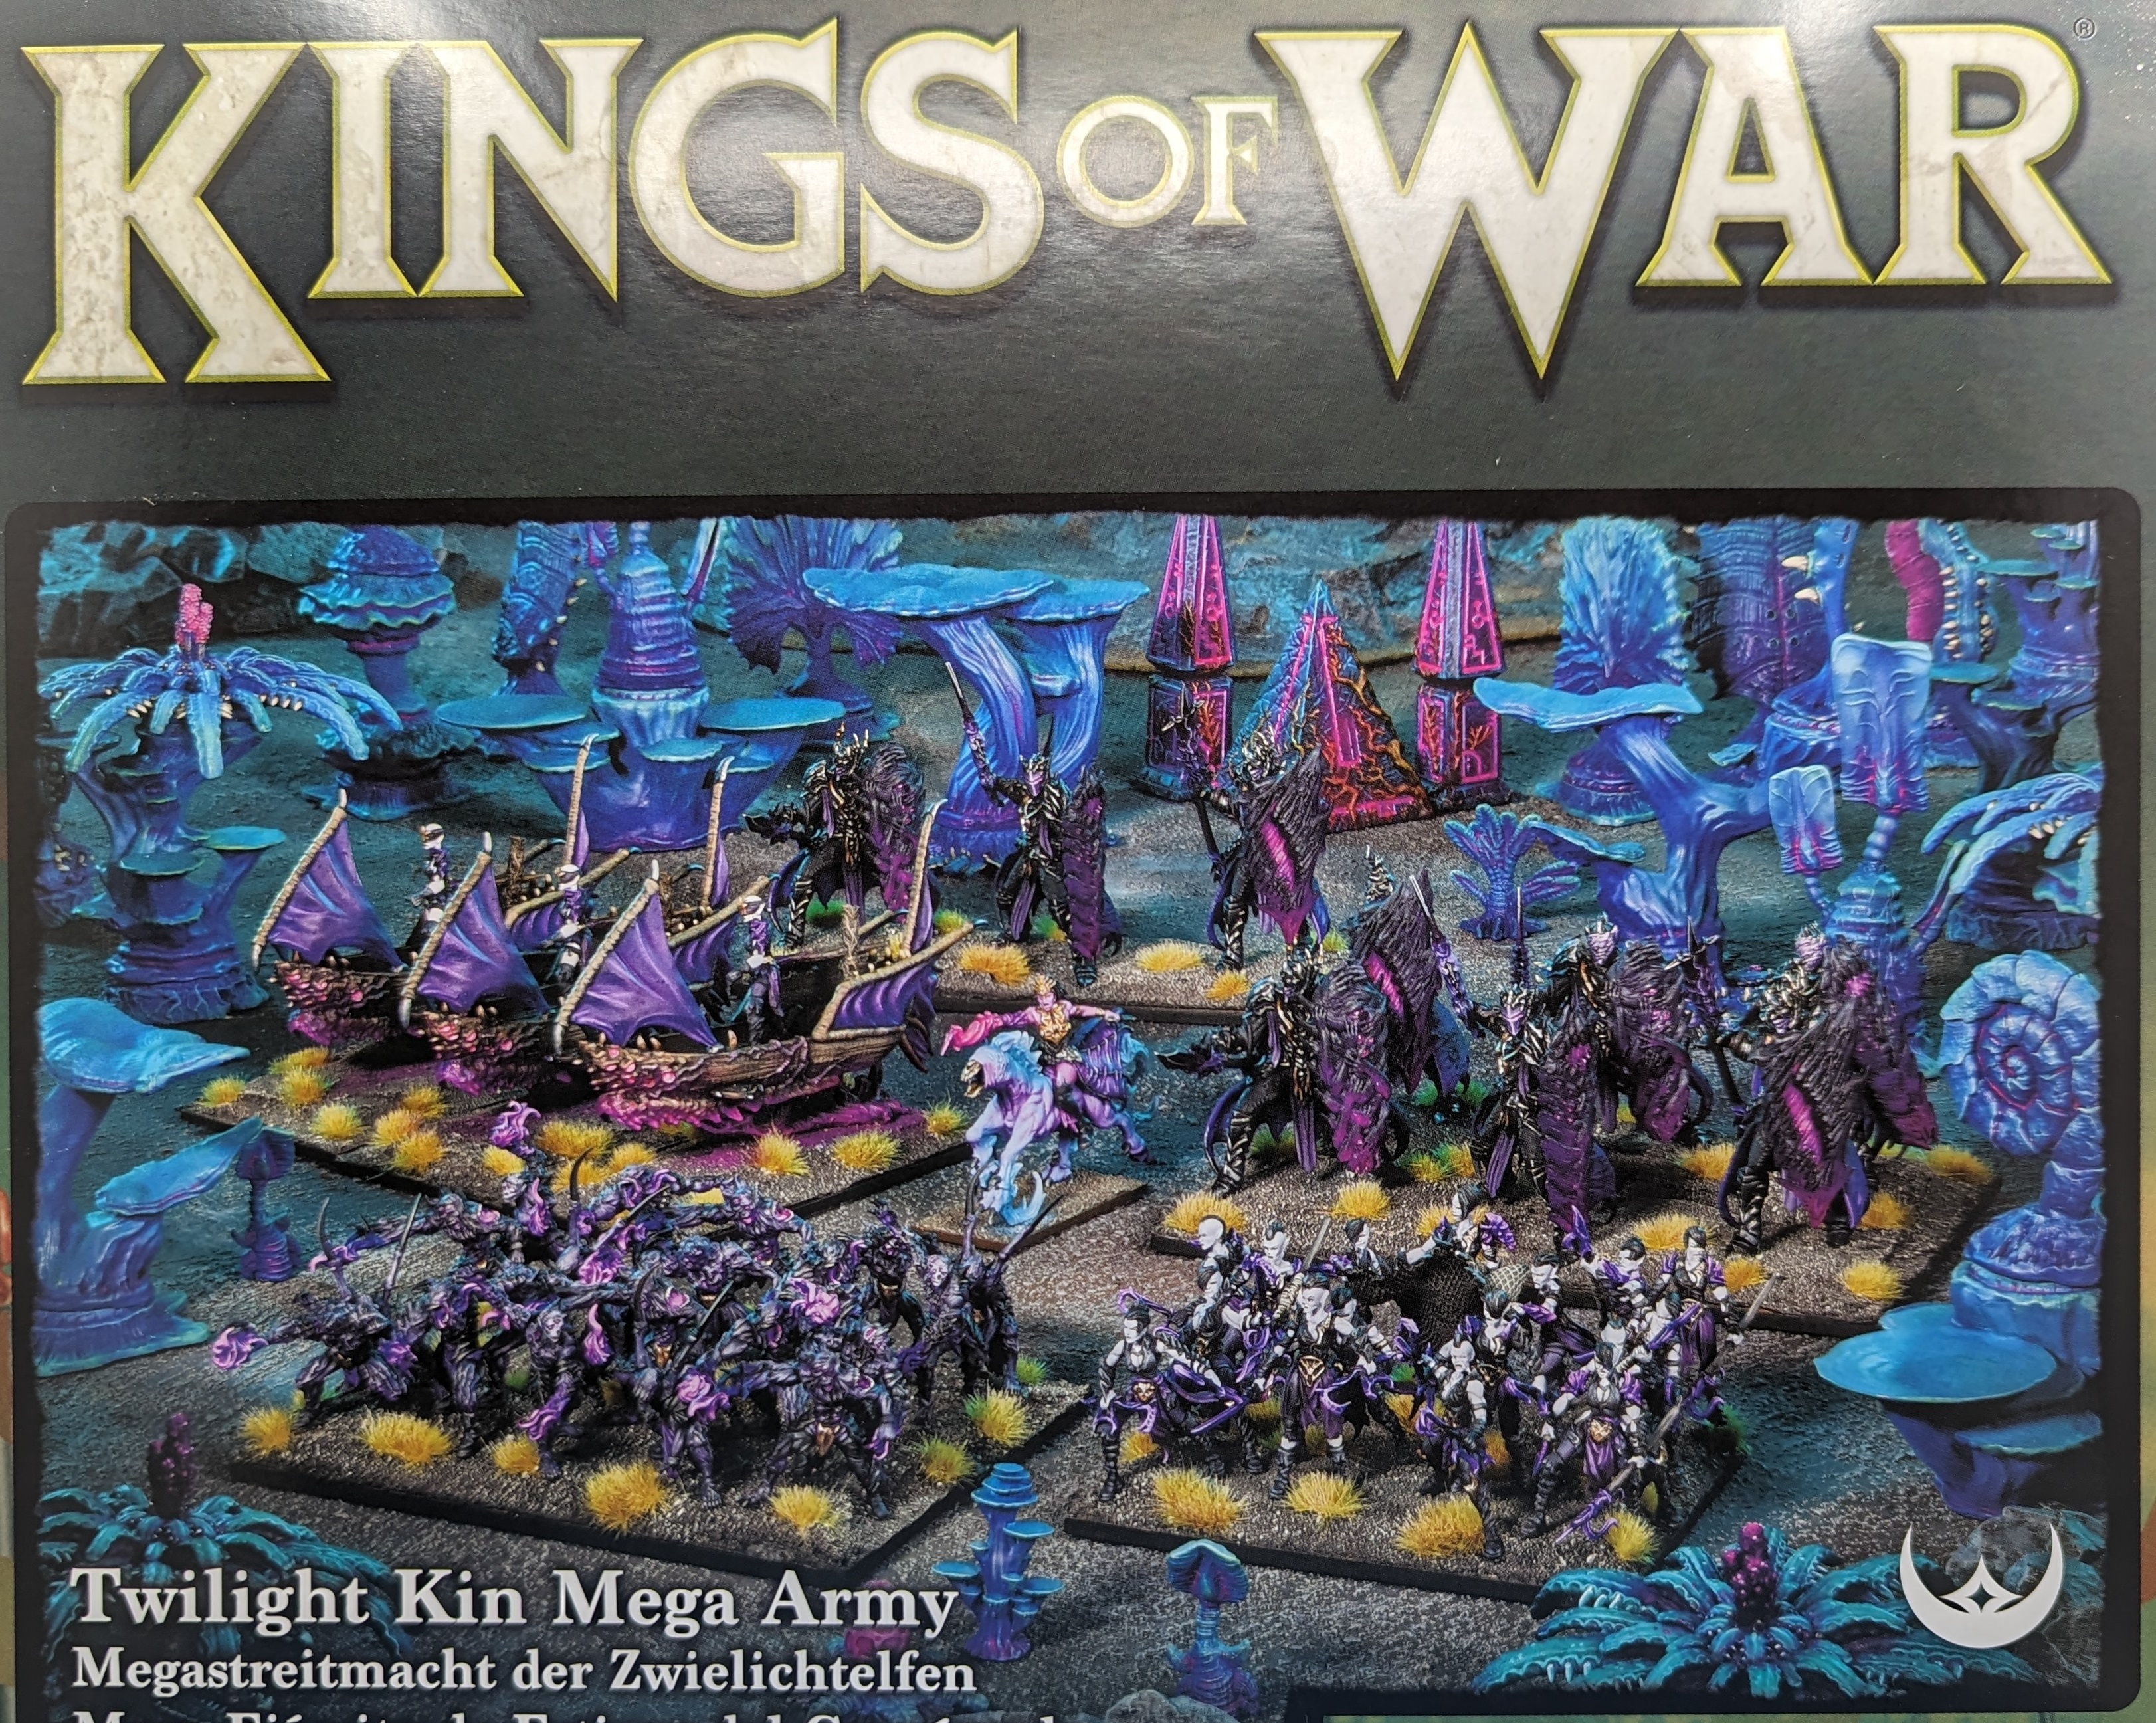 Standards, Spellcasters and Spears in Kings of War Clash of Kings